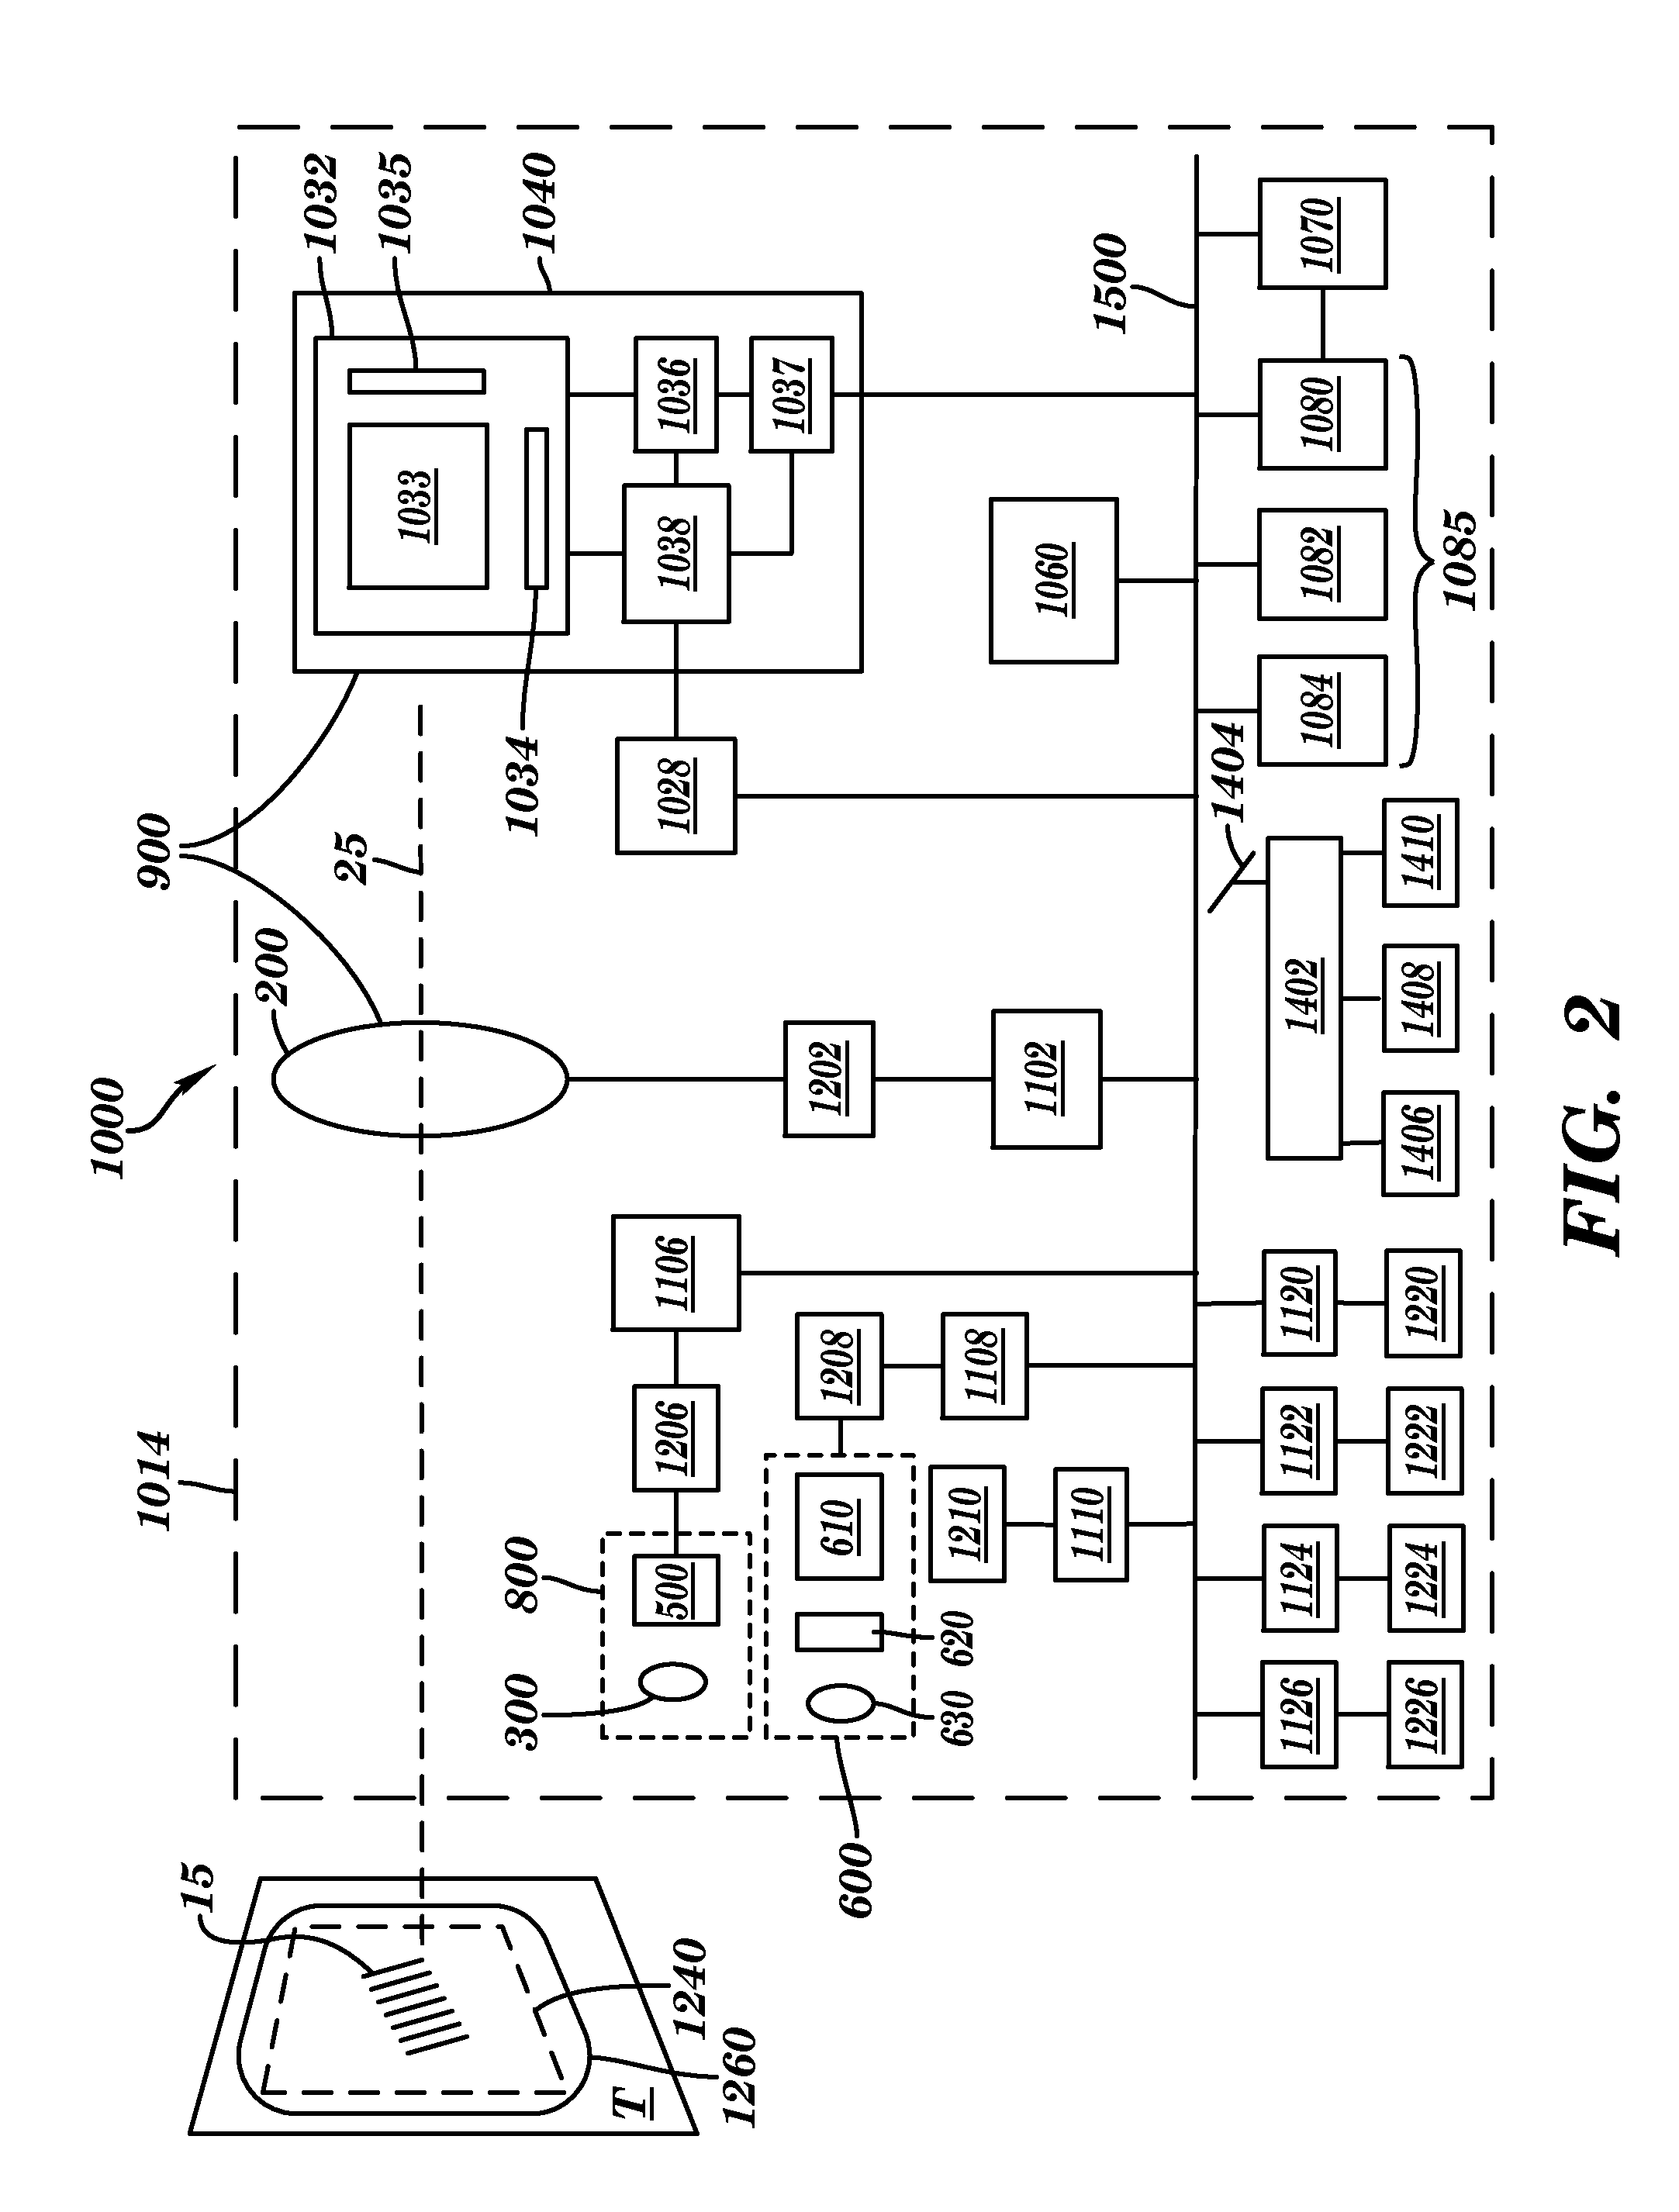 Imaging devices and methods for inhibiting or removing captured aiming pattern